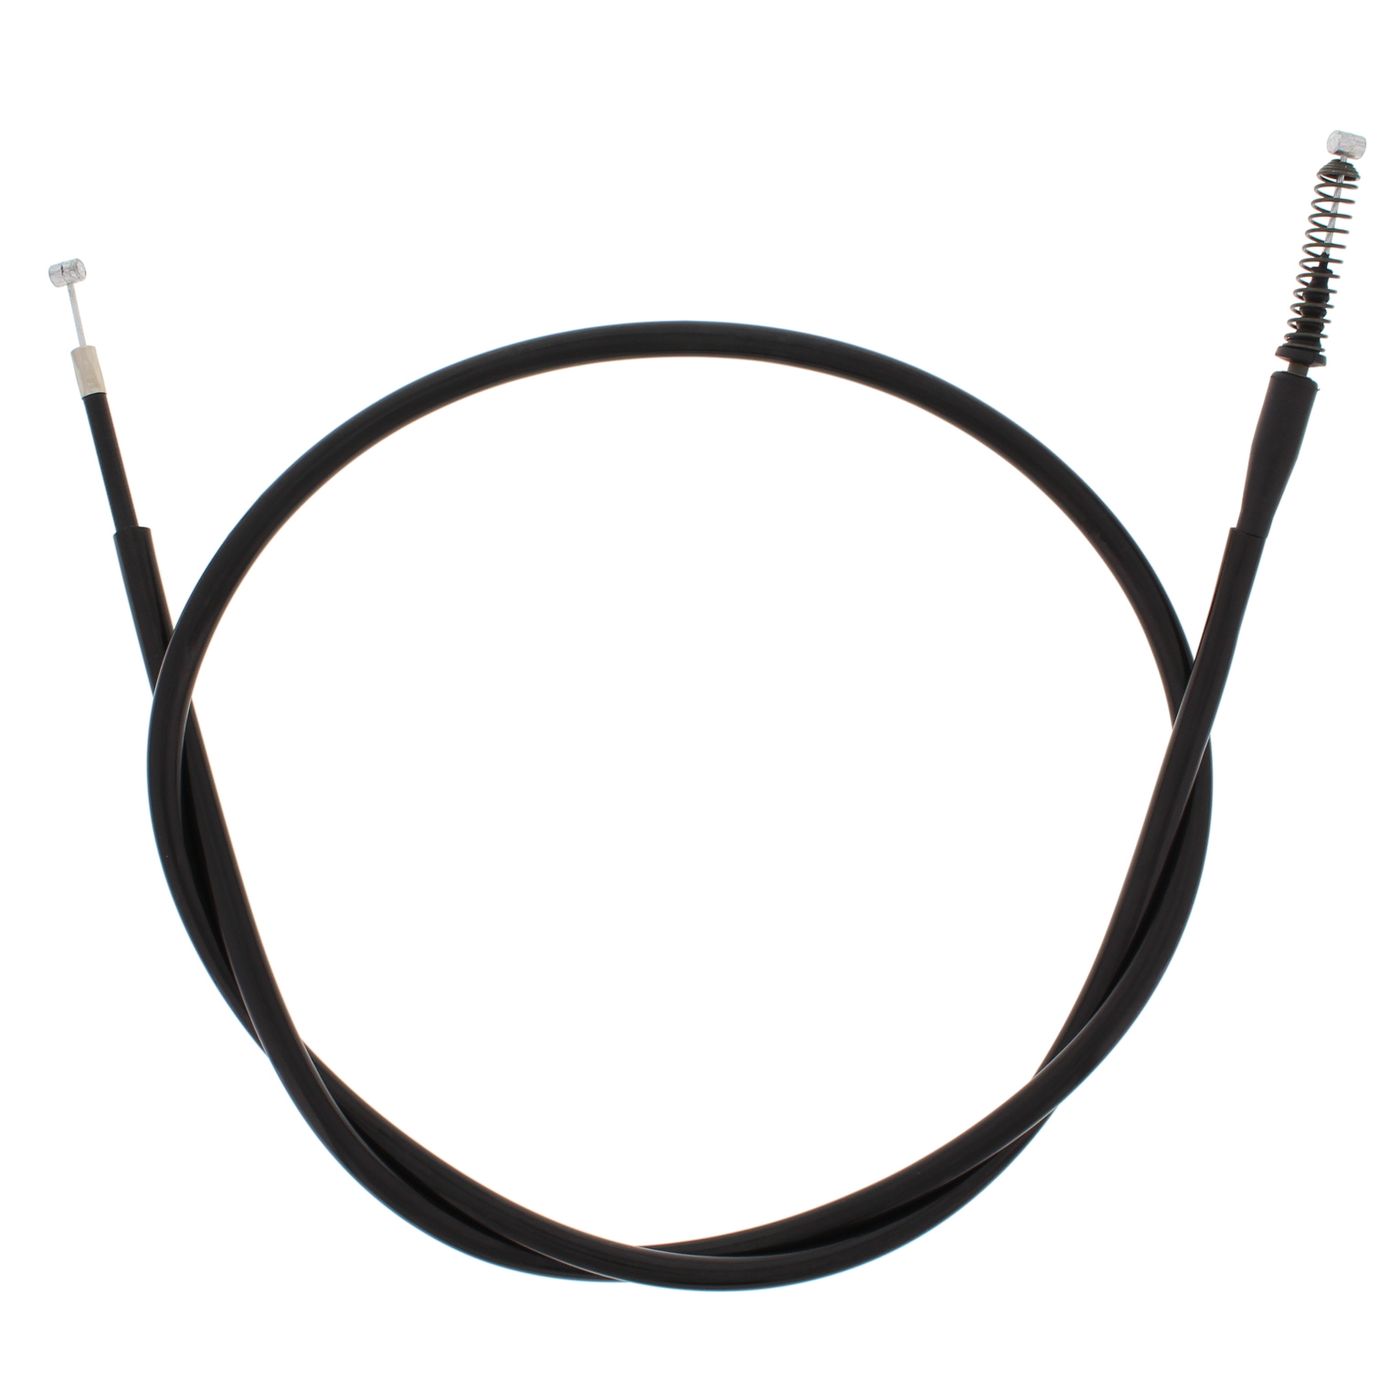 Wrp Brake Cables - WRP454008 image